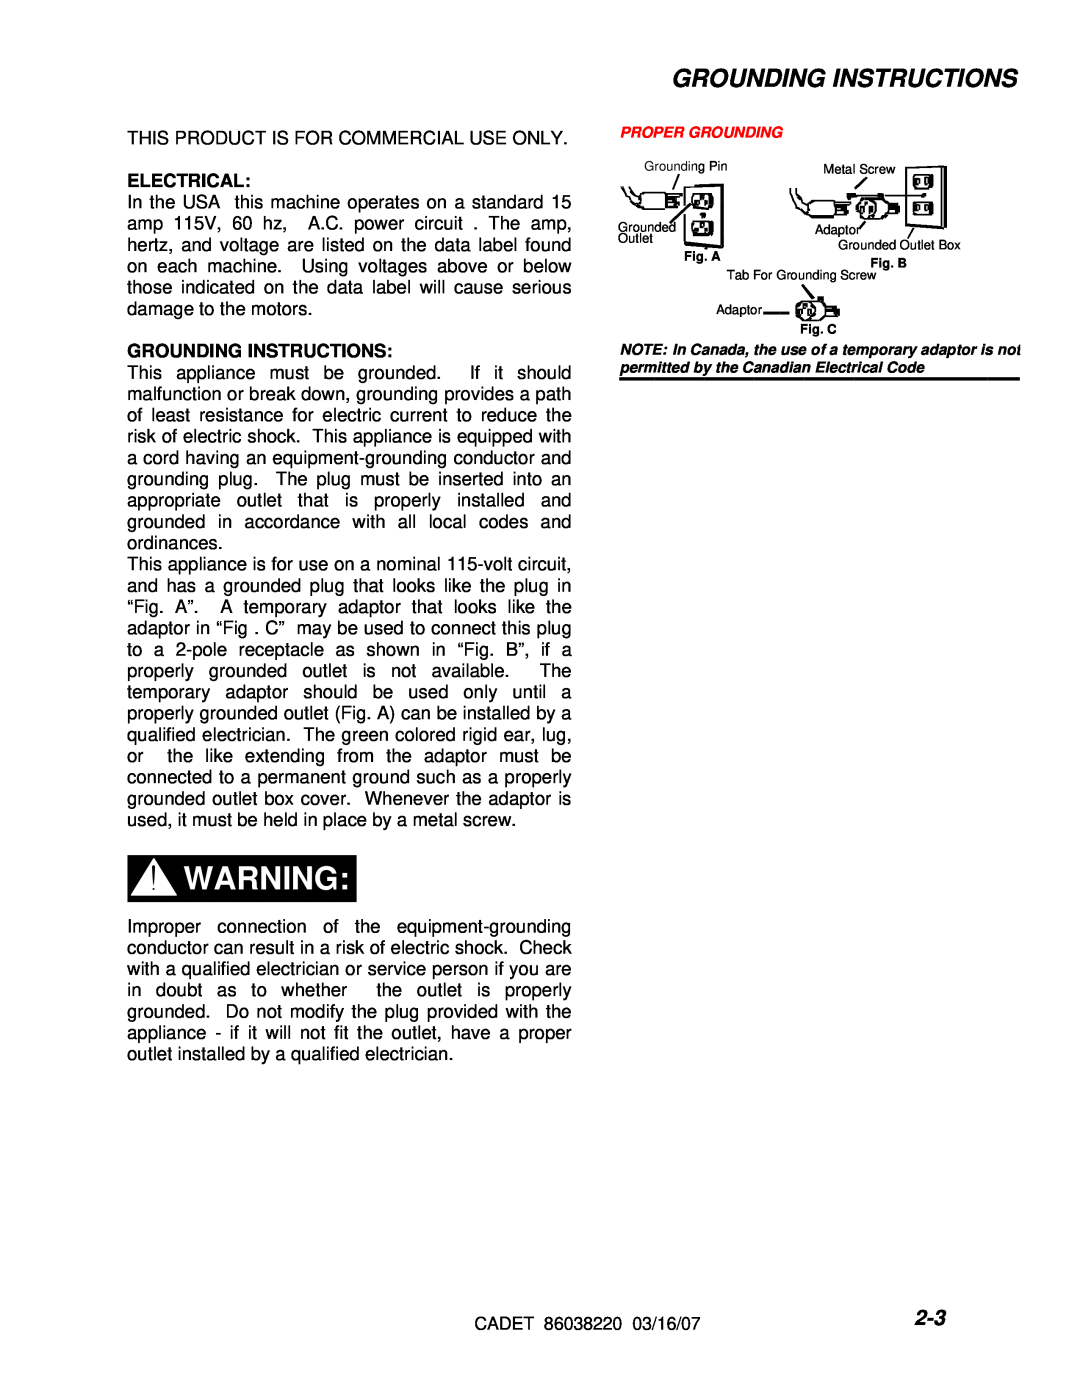 Windsor cdt7 10080220 manual Grounding Instructions, Electrical 